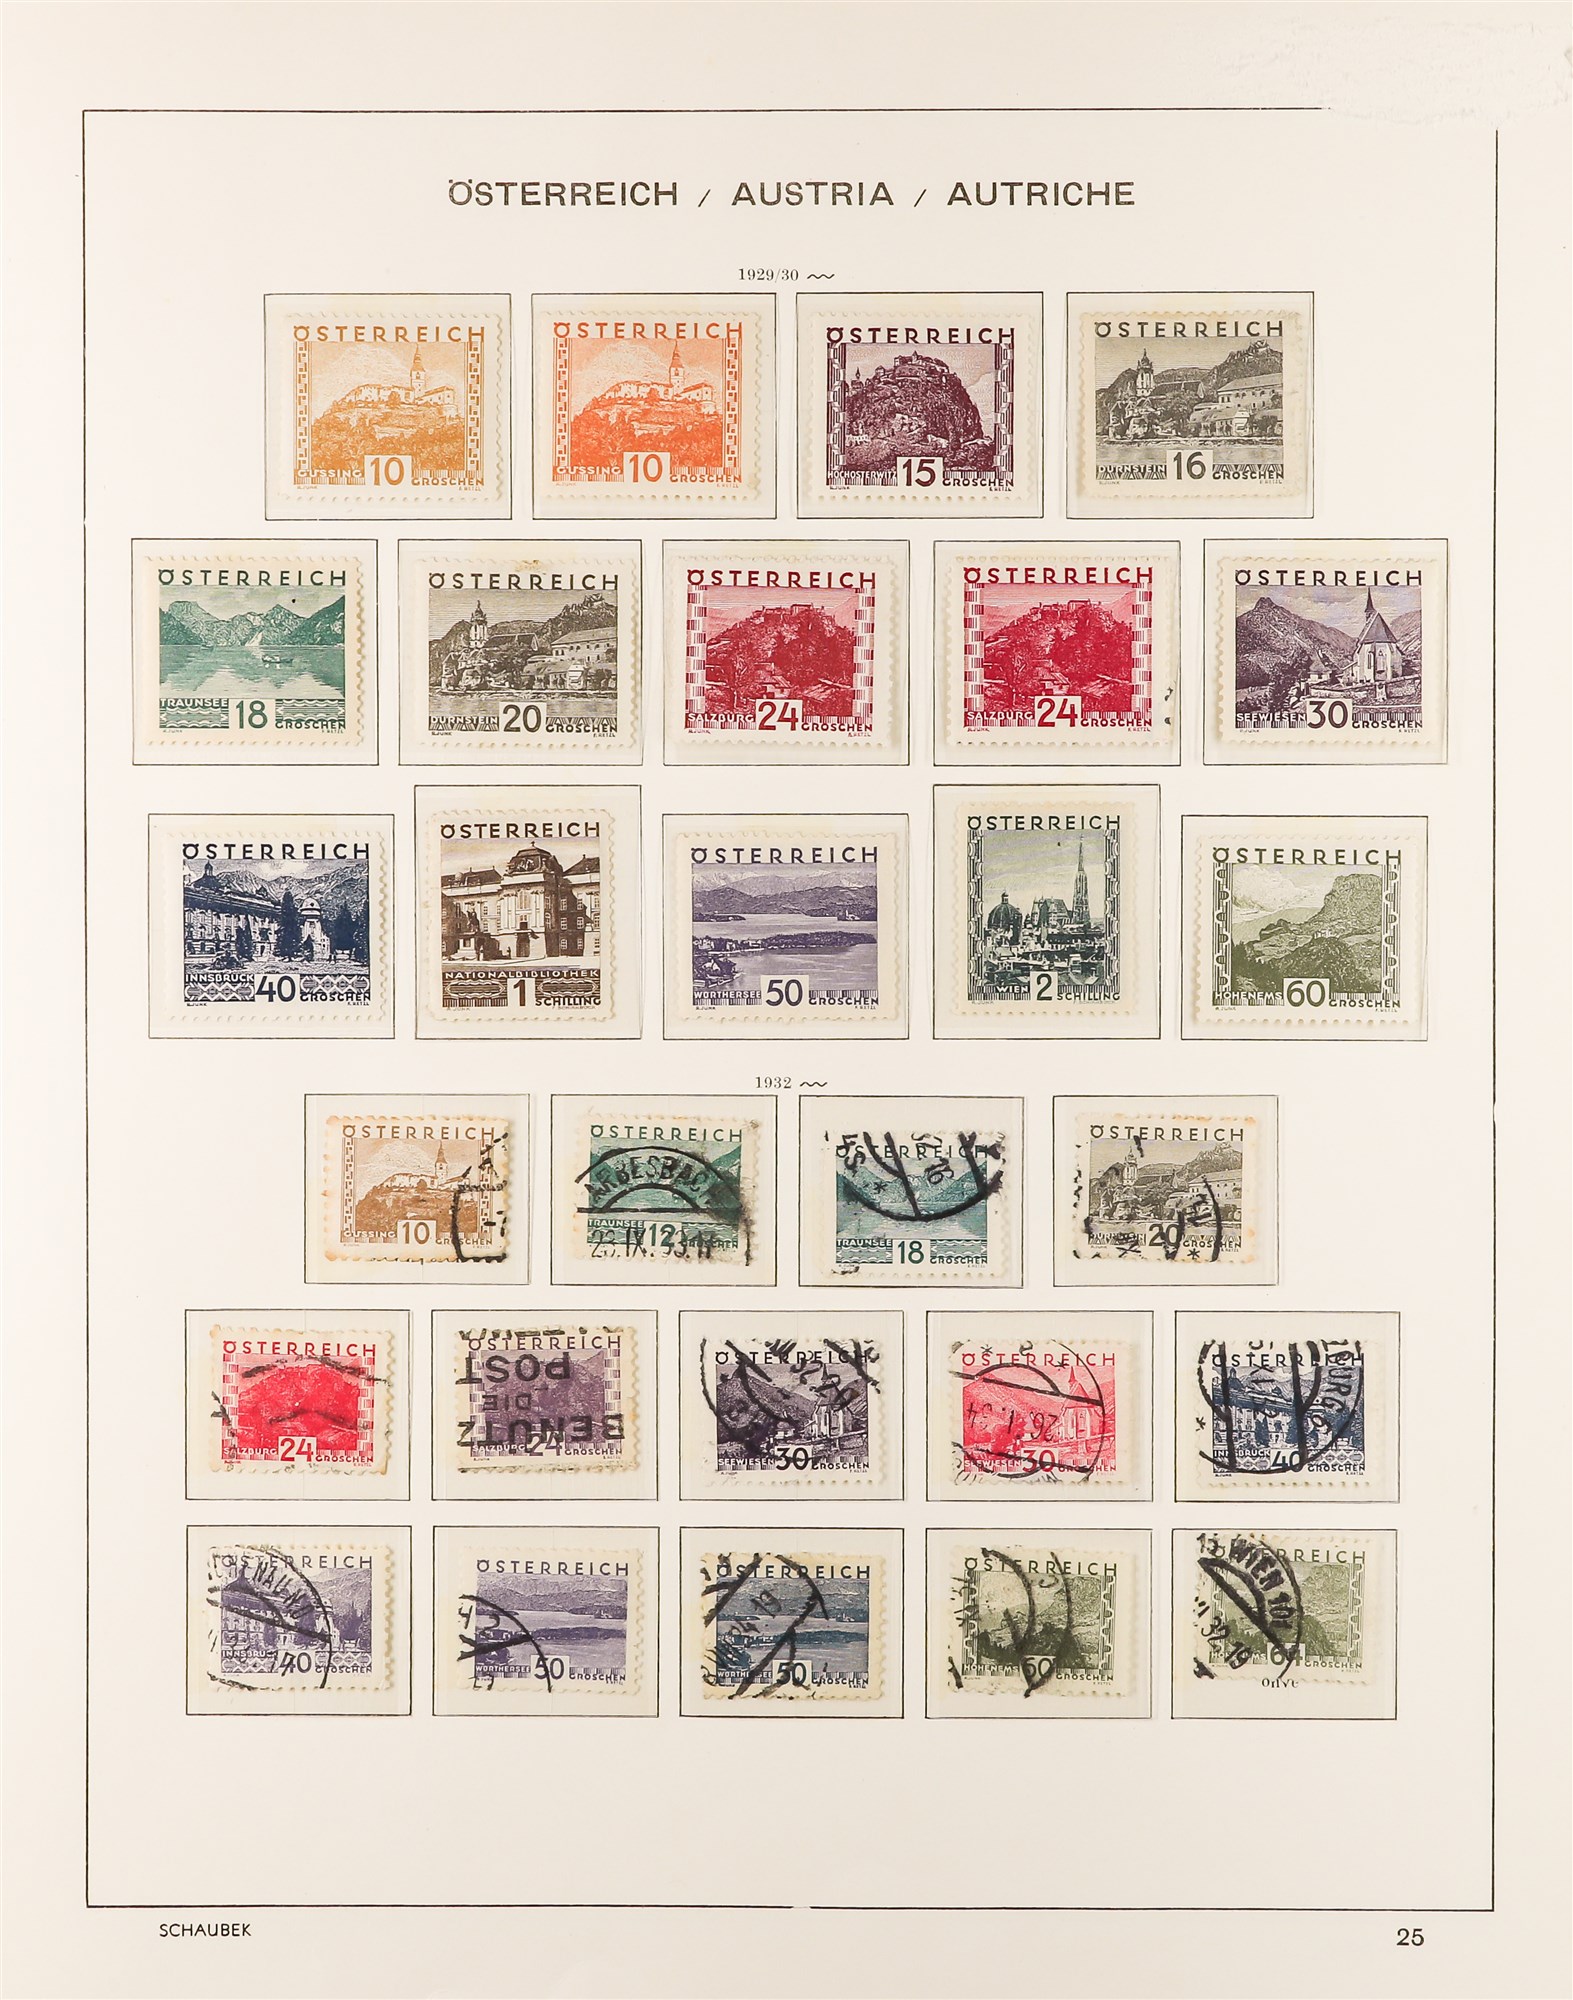 AUSTRIA 1850 - 1937 COLLECTION. of around 1000 mint & used stamps in Schaubek Austria hingeless - Image 20 of 29